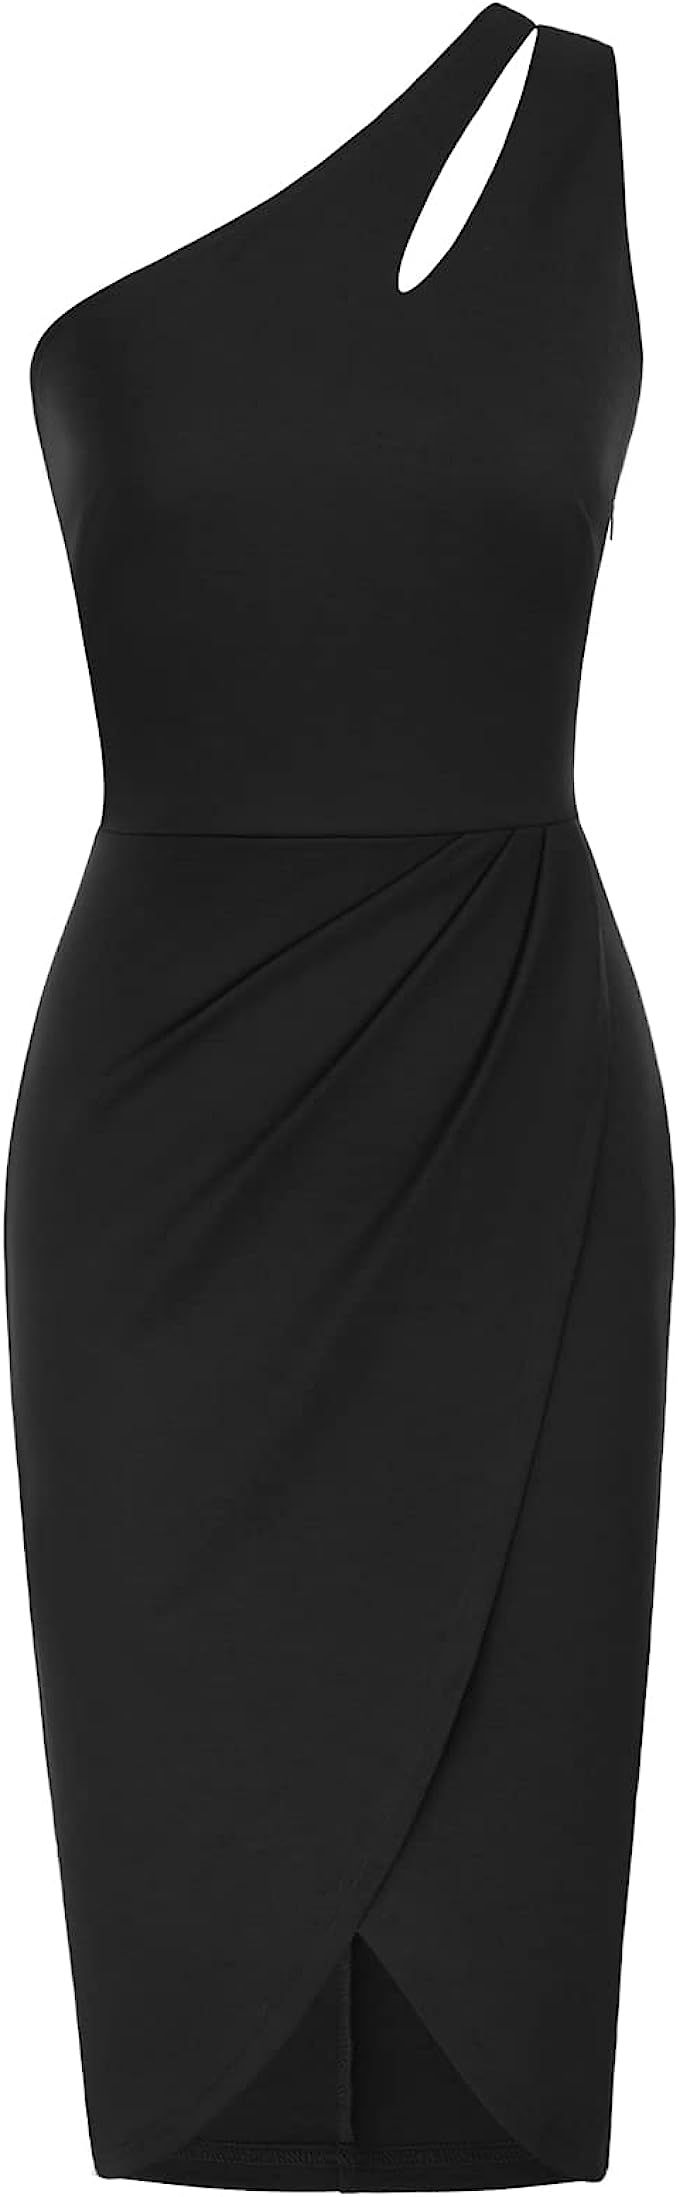 GRACE KARIN Women's One Shoulder Cutout Ruched Bodycon Dress Sleeveless Cocktail Party Wedding Dr... | Amazon (US)